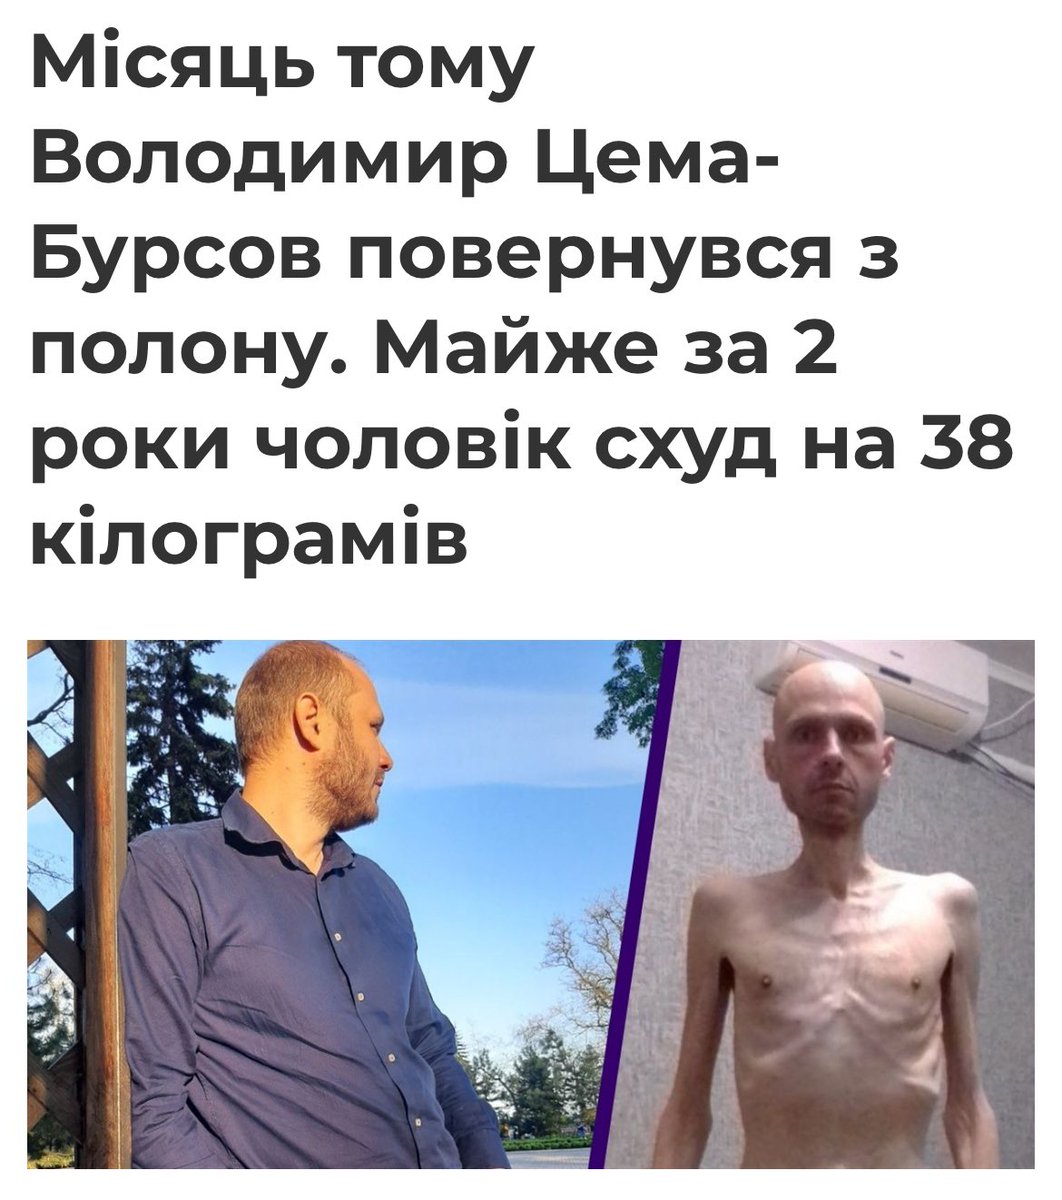 Minus 38 kg.
Russian captivity means slow death.

More than 1000 Azov brigade warriors still in hellish captivity. 
Almost 2 years.

Remember Olenivka terrorist act where 53+ Azov soldiers were killed by russians.

Russia is just a 100% terrorist state. 

svoi.city/articles/34113…